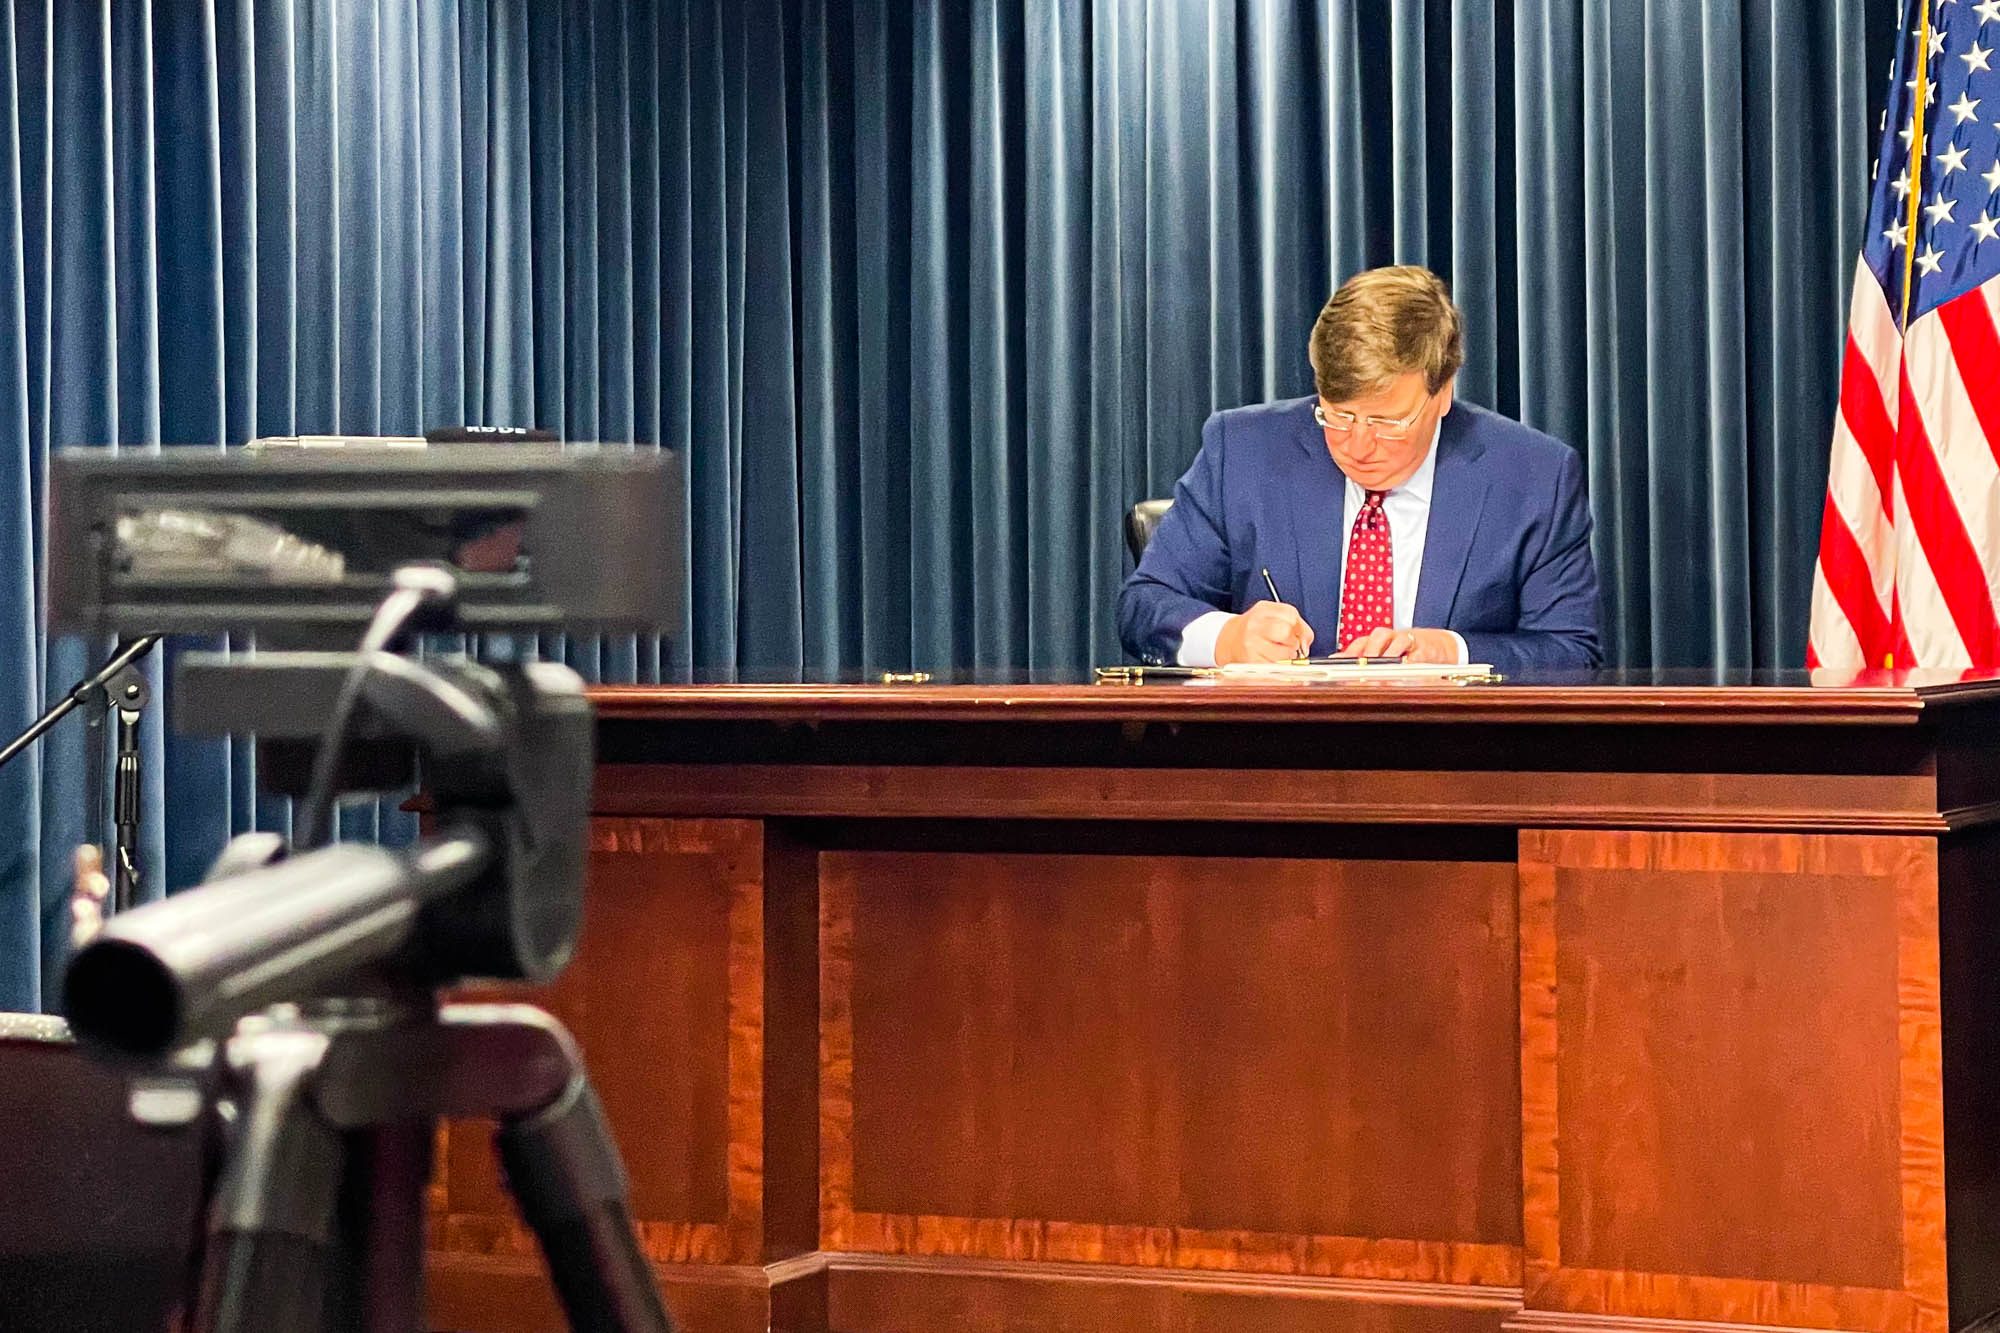 a photo of Tate Reeves at a desk signing a bill, with a camera in front of him